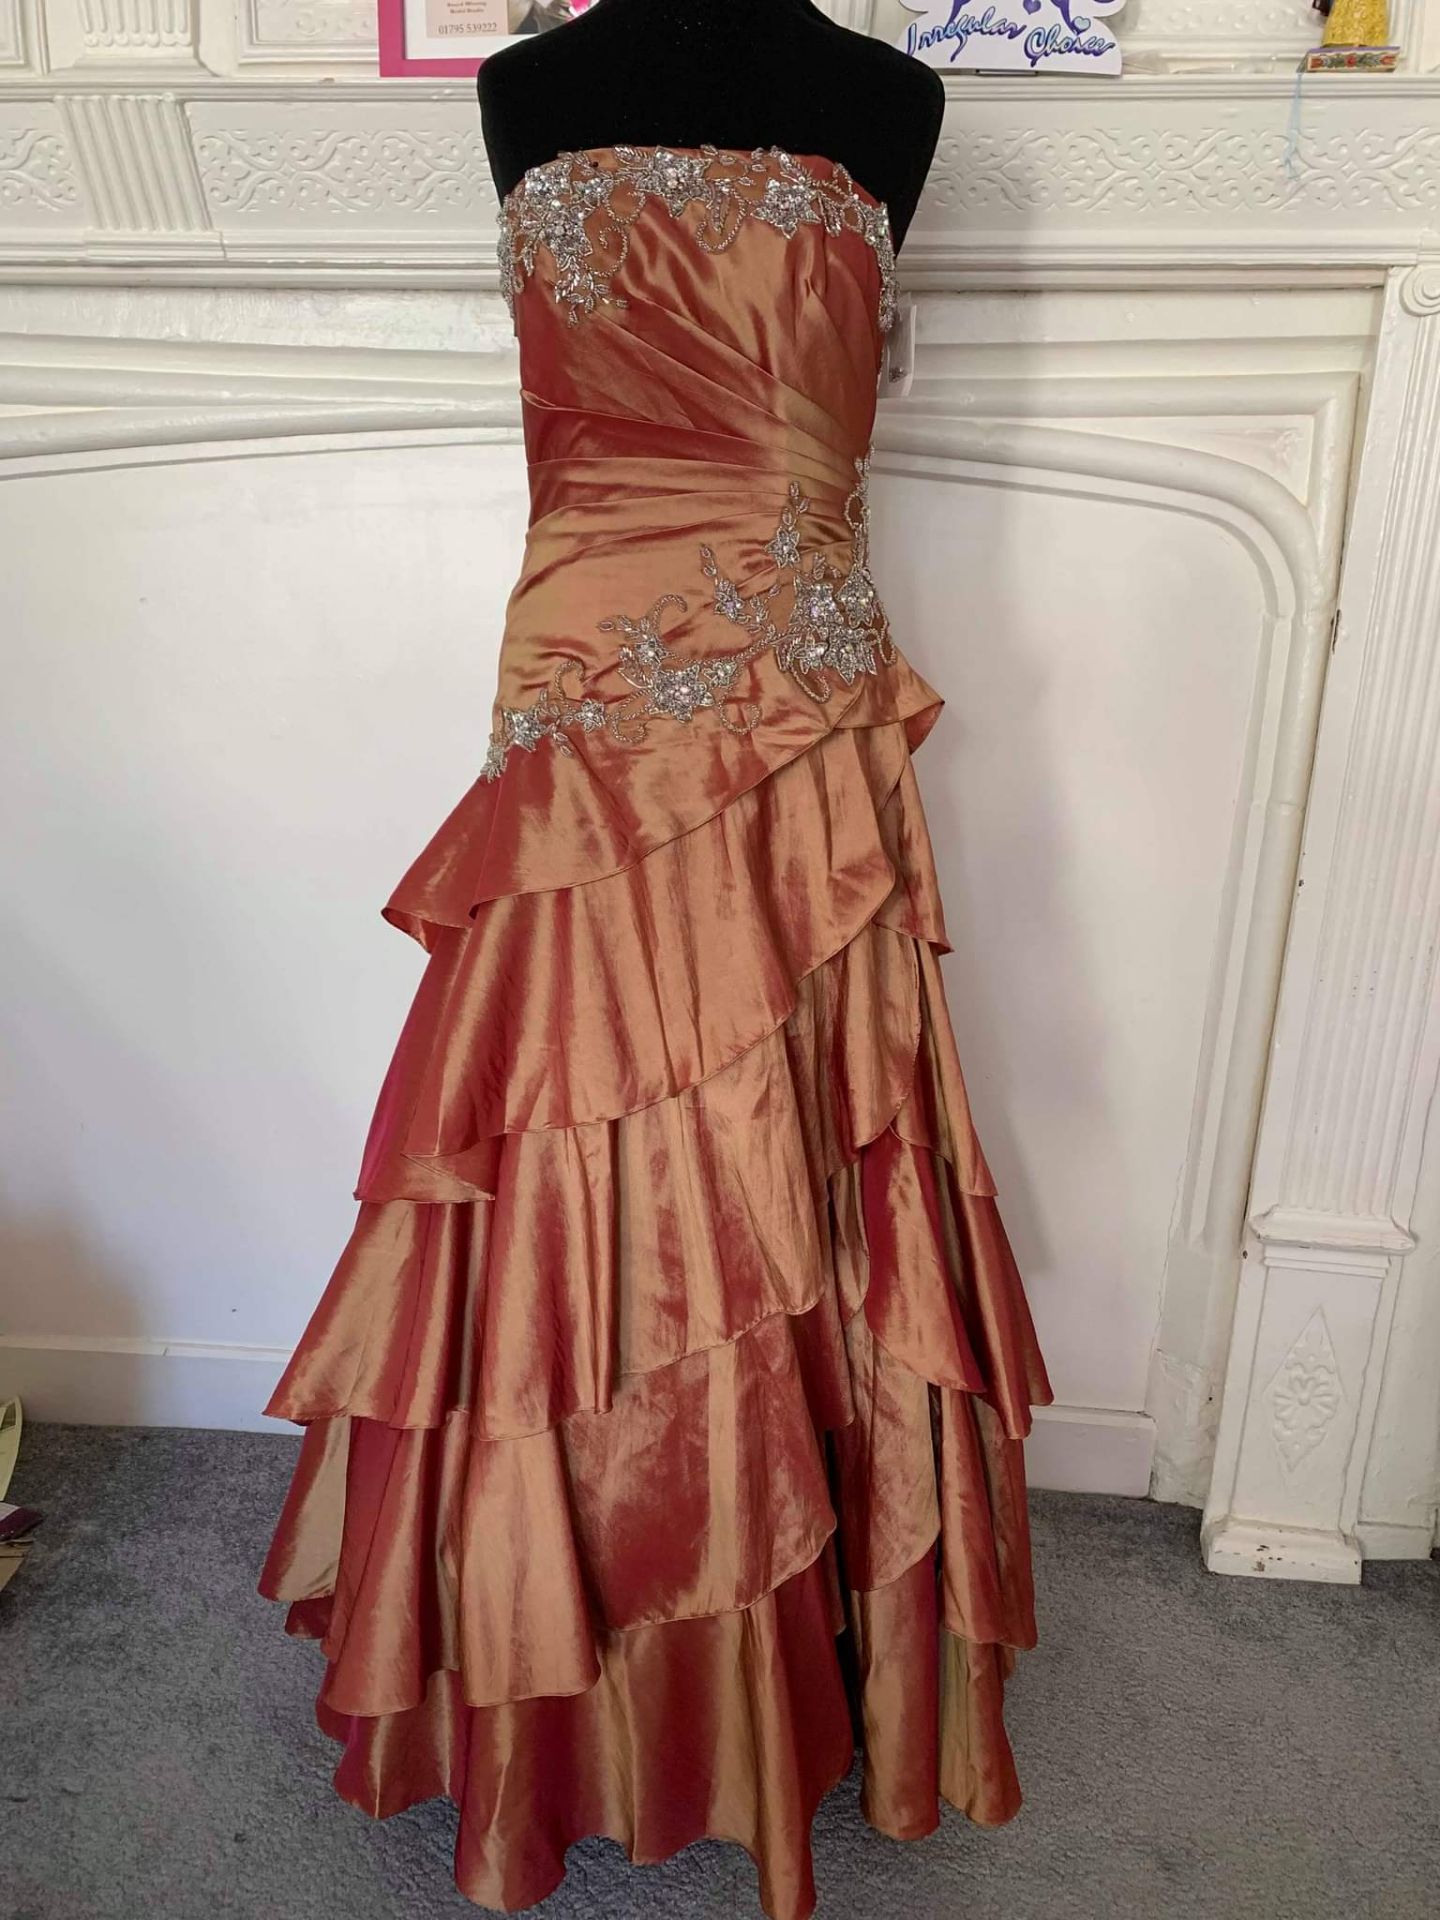 Bronze Ruby Prom Dress Size 12 - Image 2 of 3